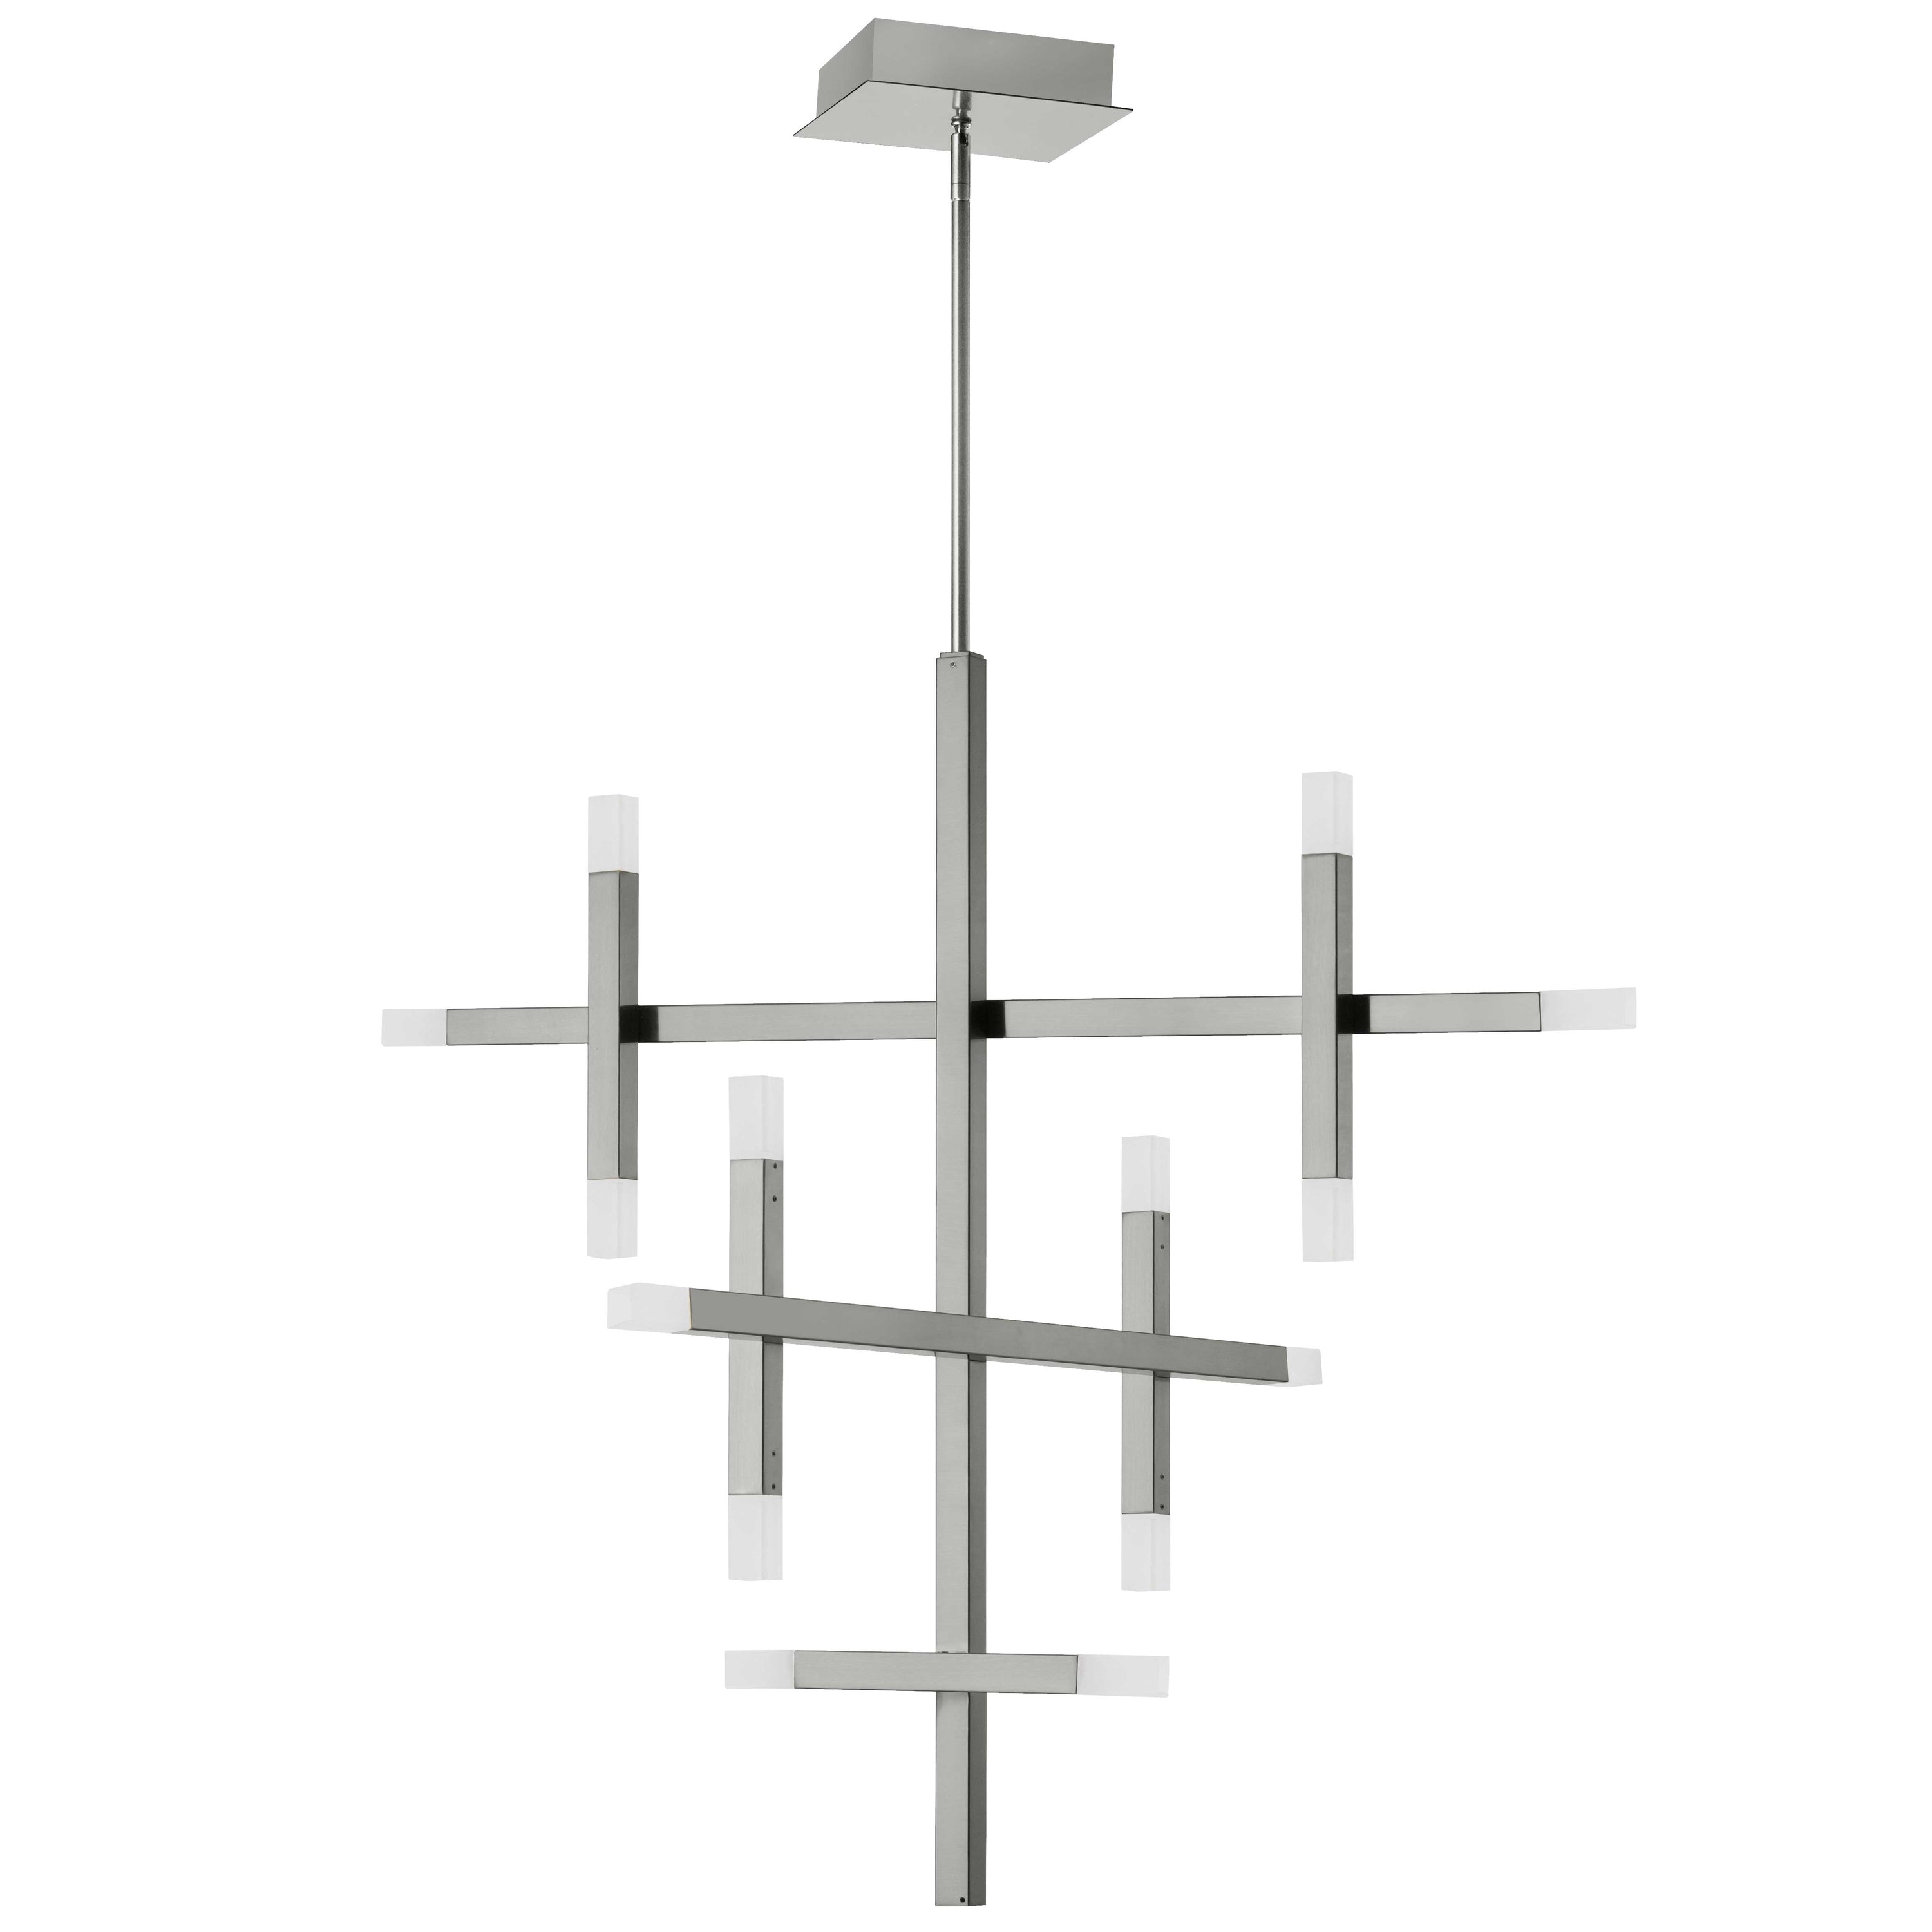 Dainolite Acasia - ACS-3656C-PC-FR - 42W Chandelier Fixture Polished Chrome with Frosted Acrylic Diffuser - Polished Chrome